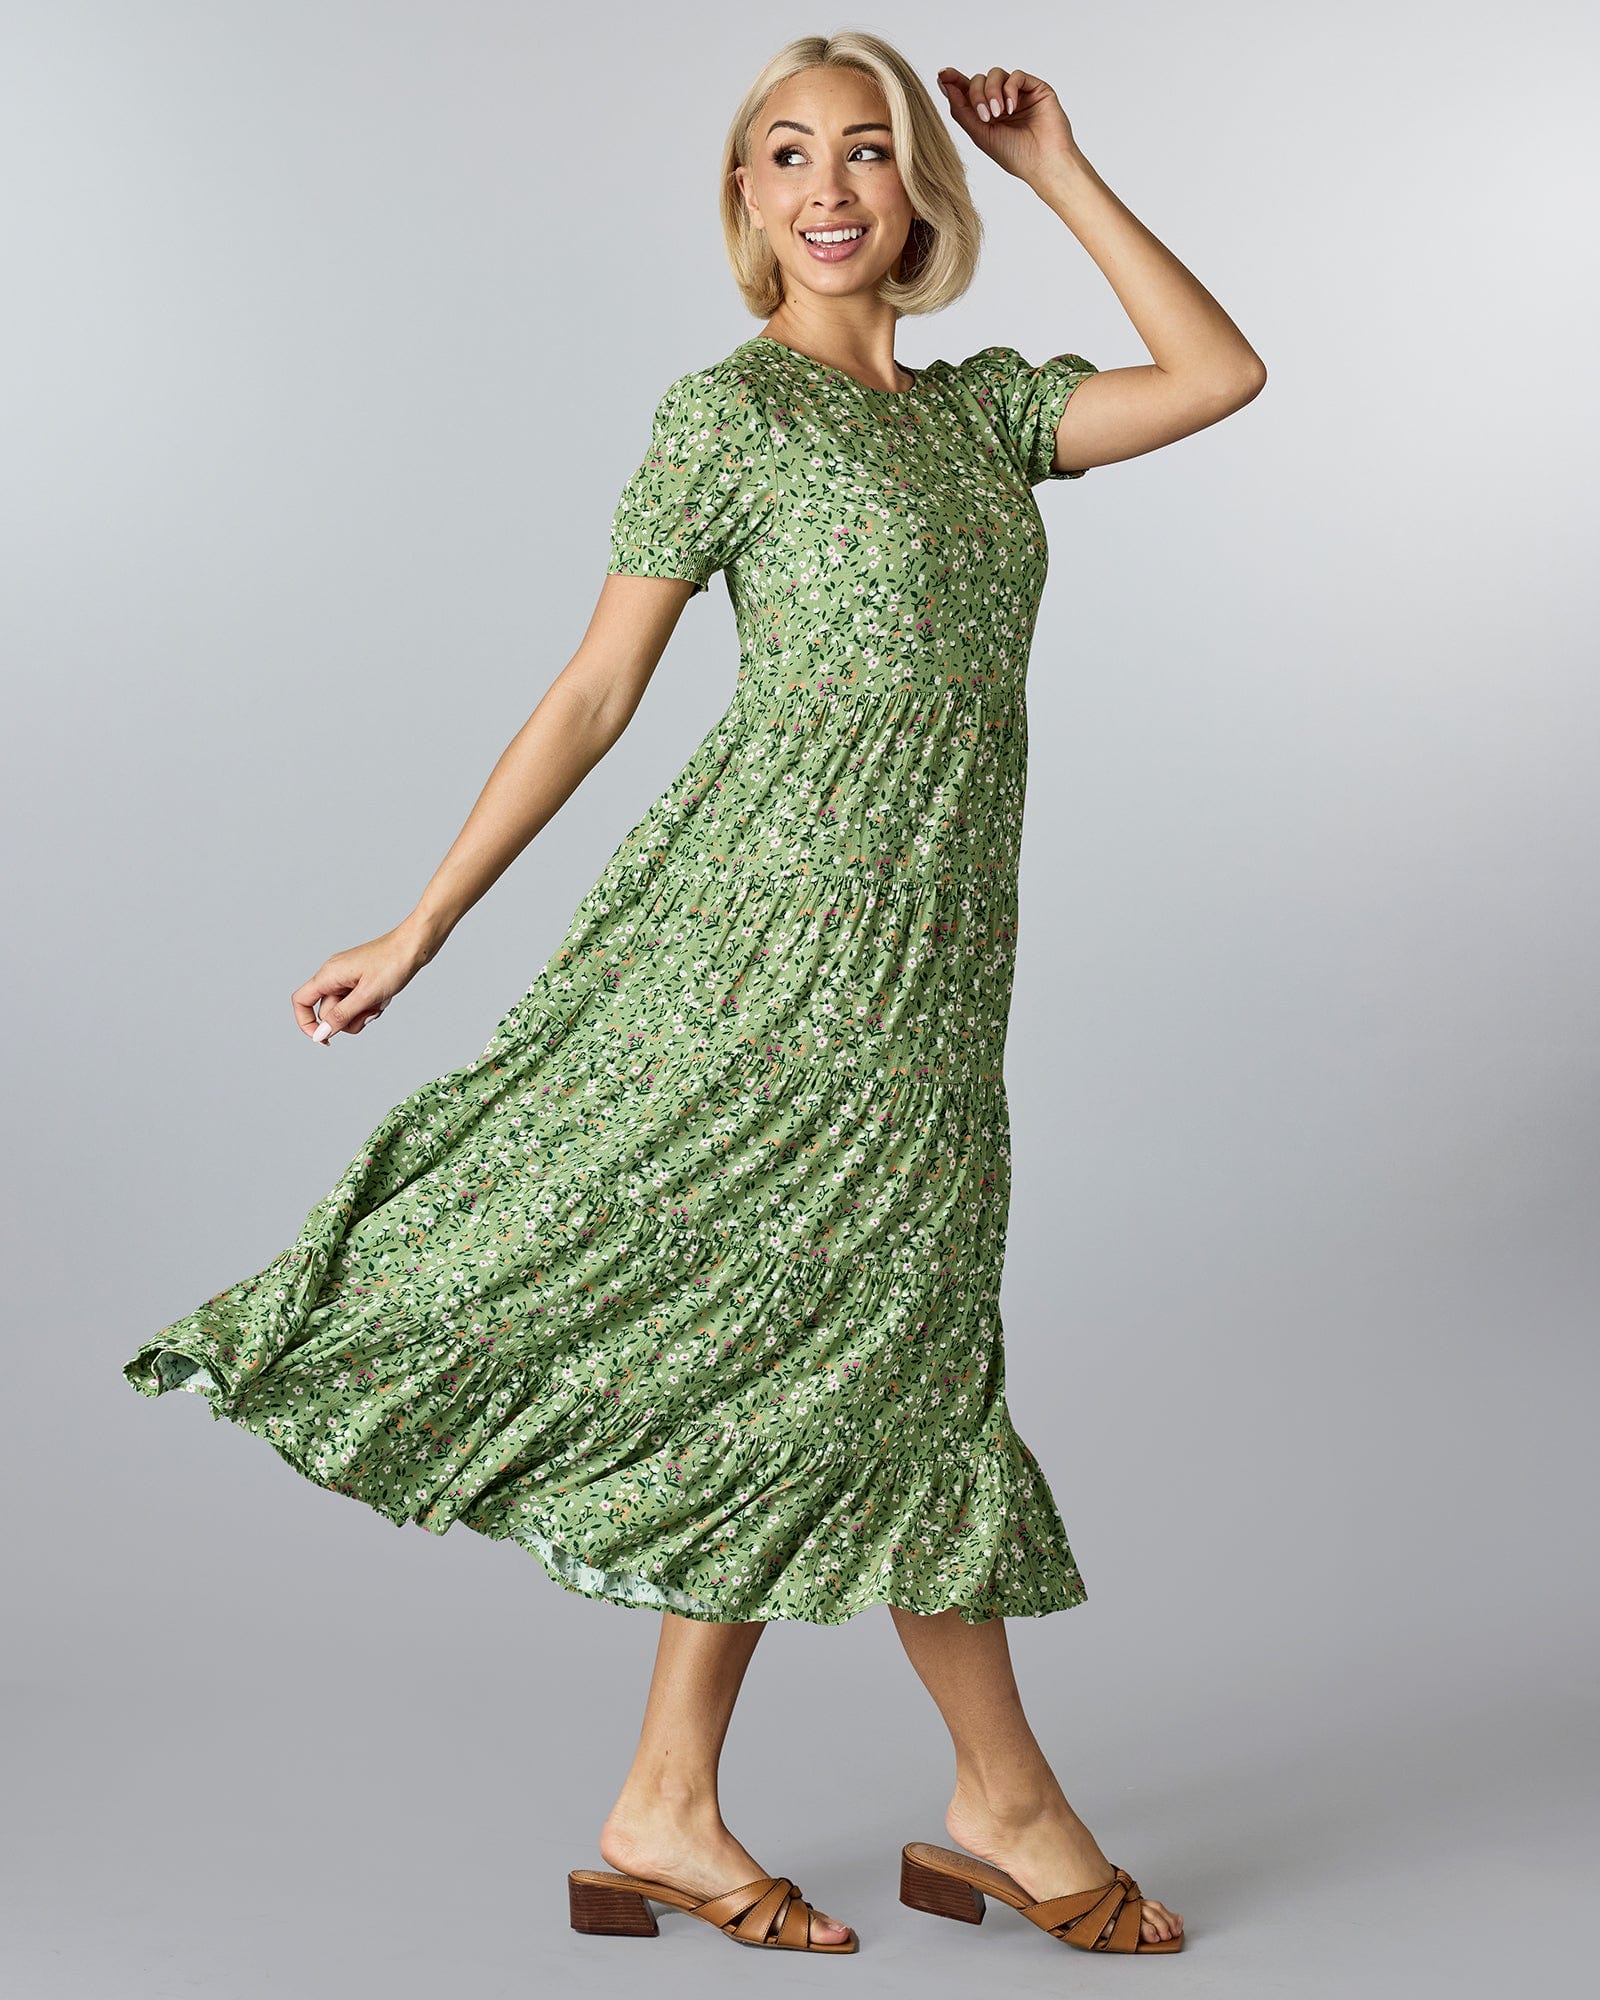 Woman in a green floral dress that has short sleeves and tiers down the skirt.